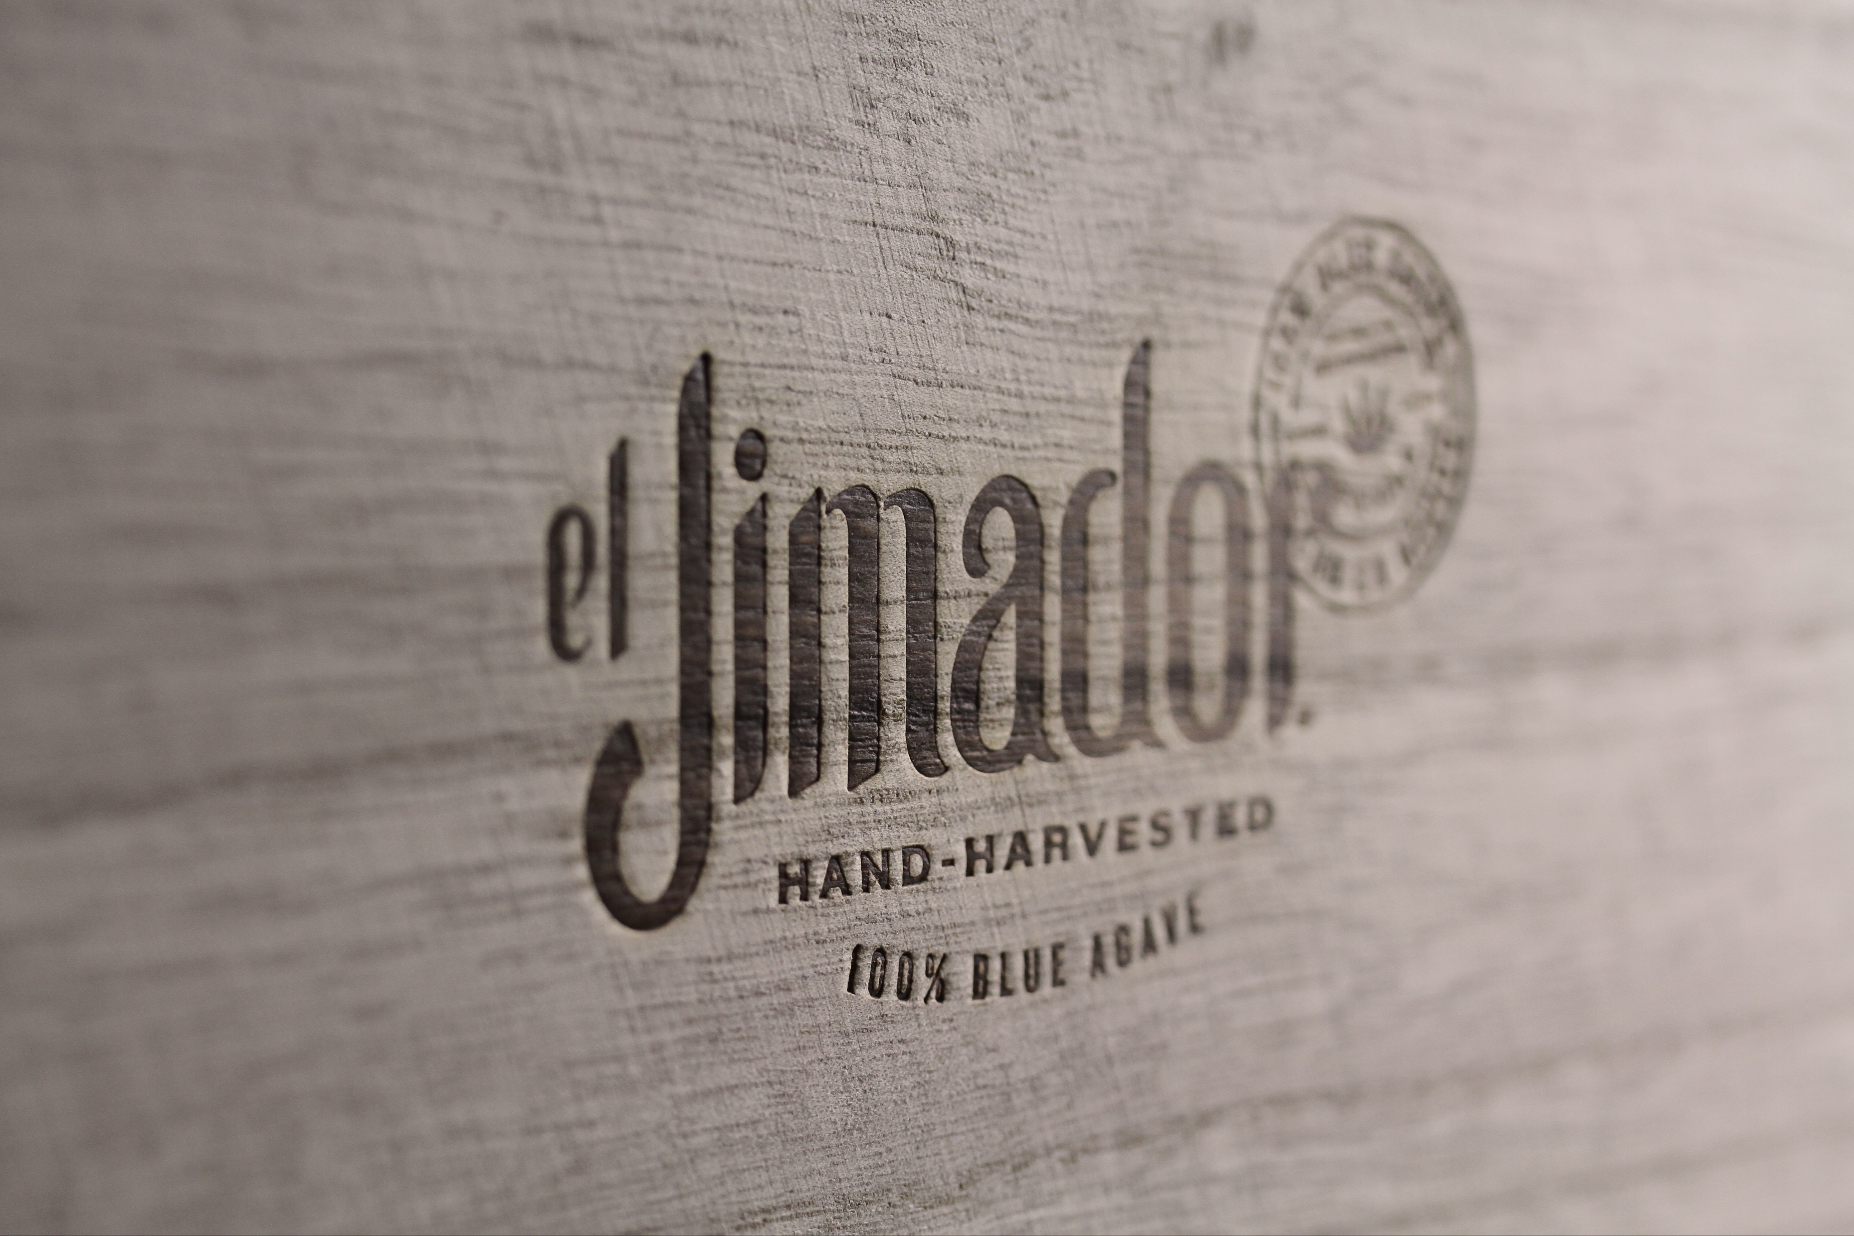 Creativity isn't an occupation...It's a Preoccupation - El Jimador - Craft  on Draught